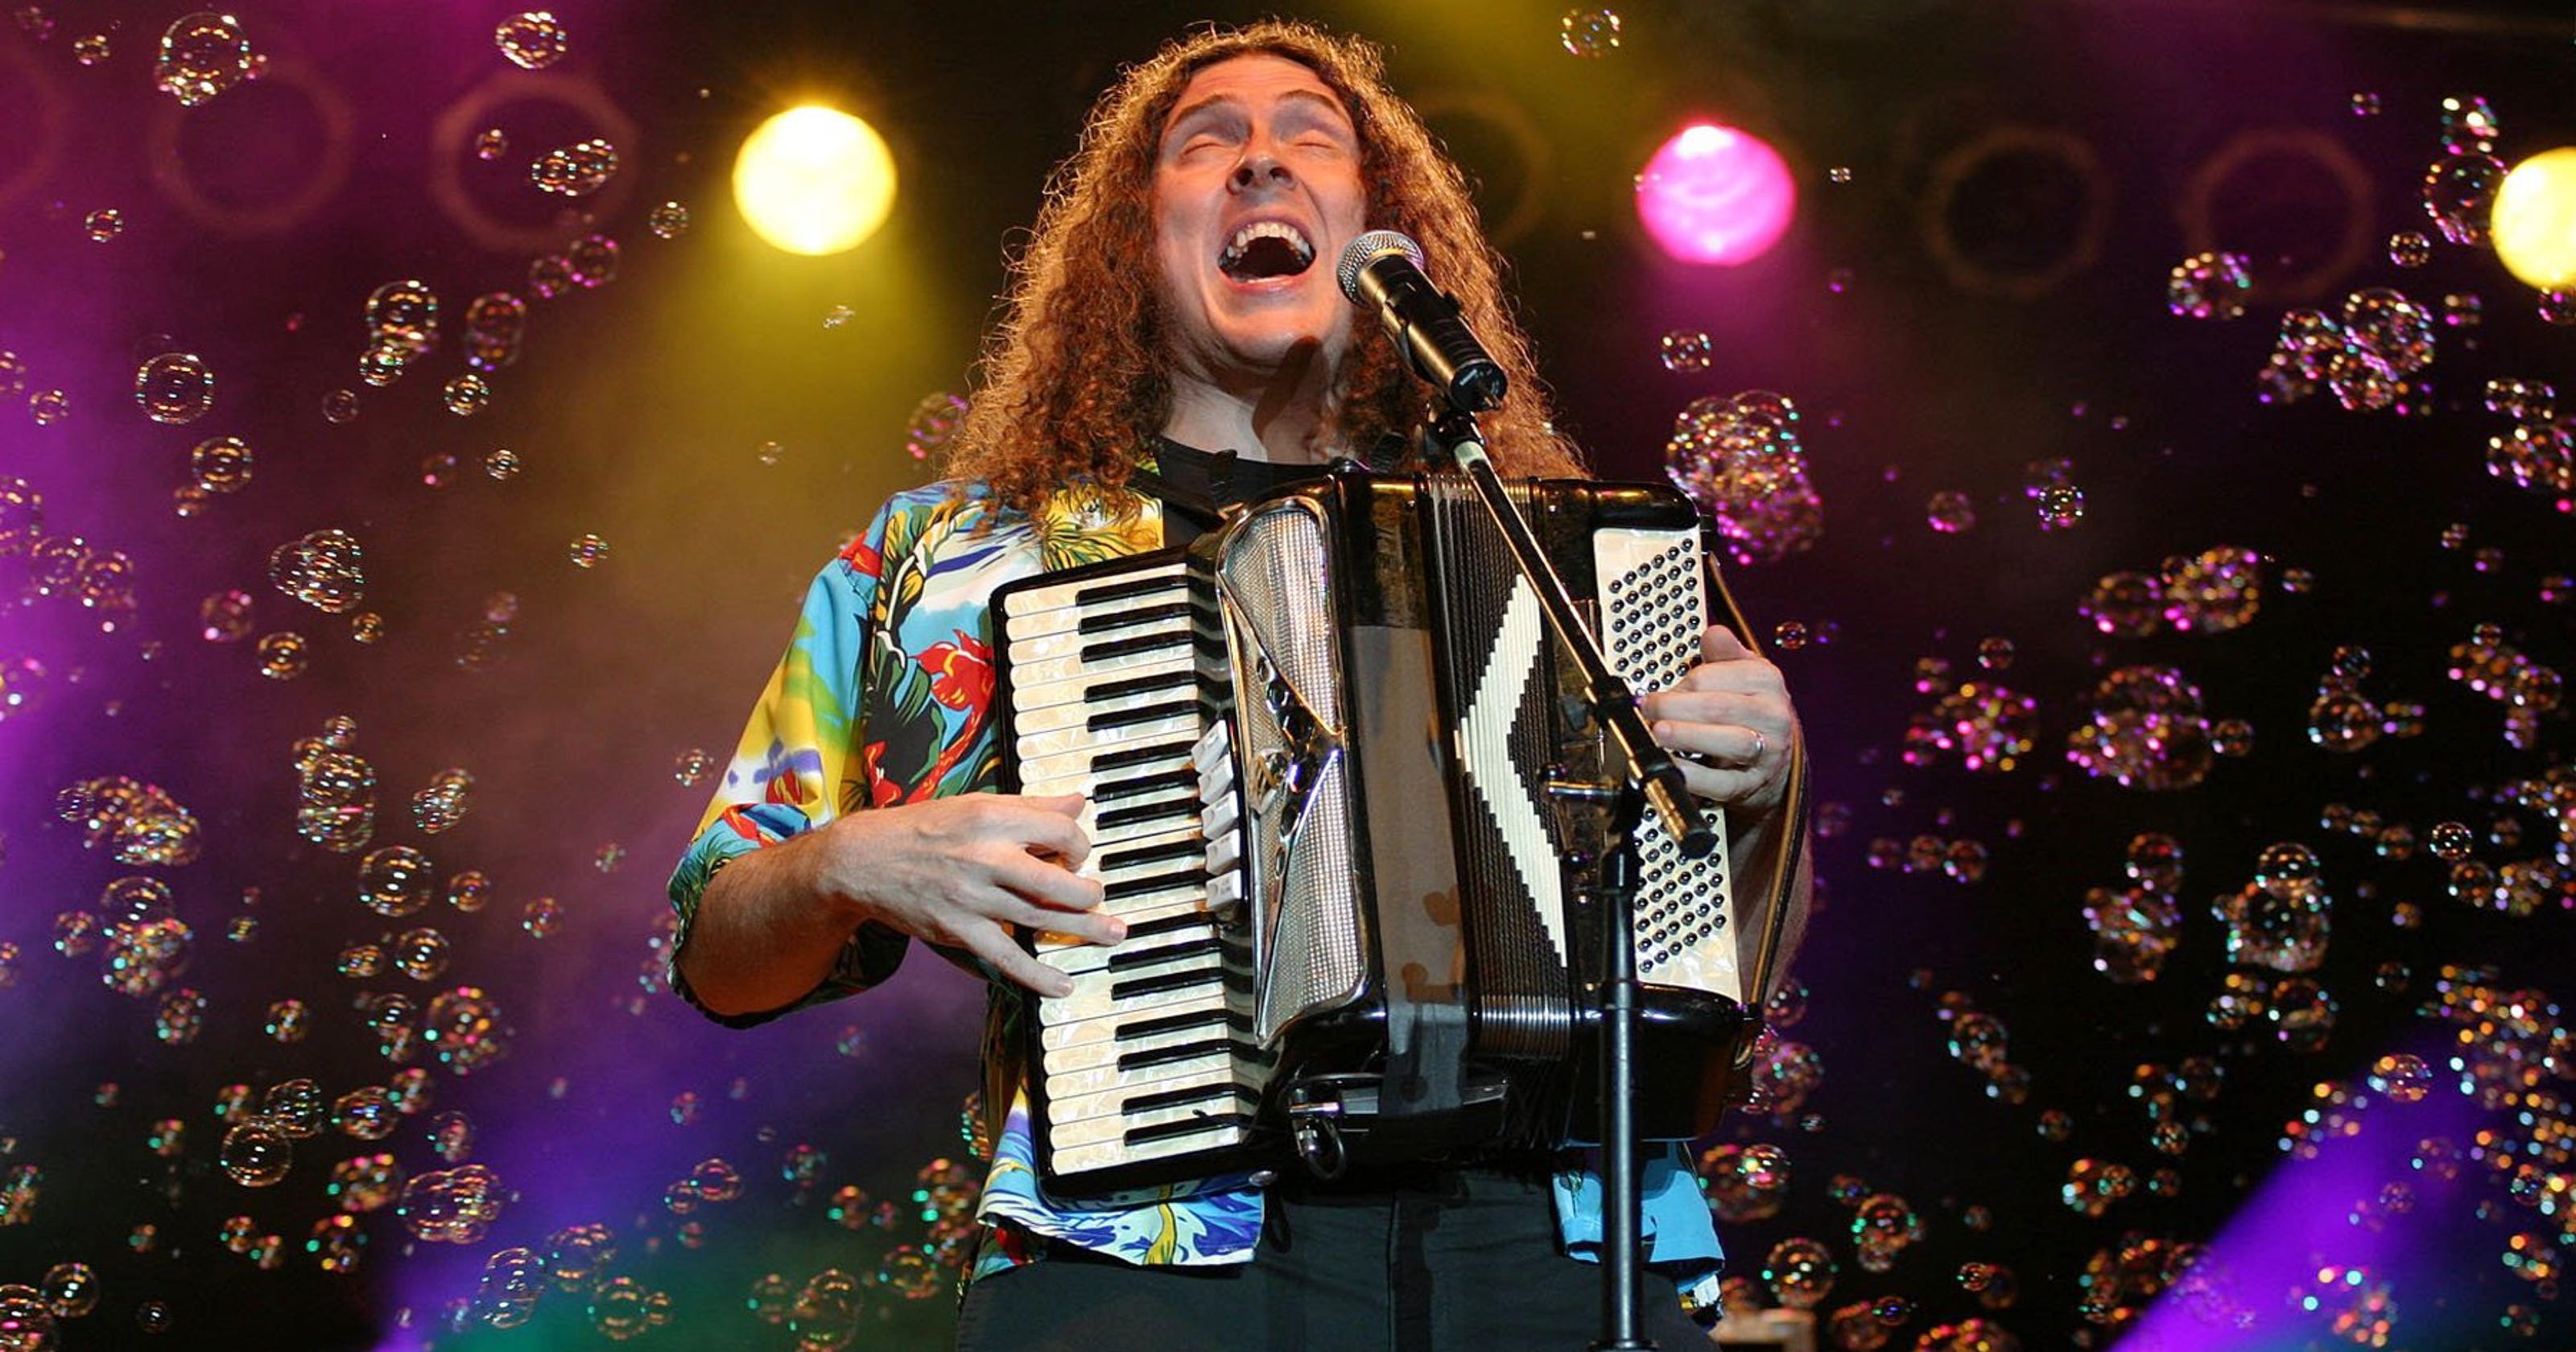 Weird Al Yankovic coming to McCallum. Here's what you'll hear at the show.